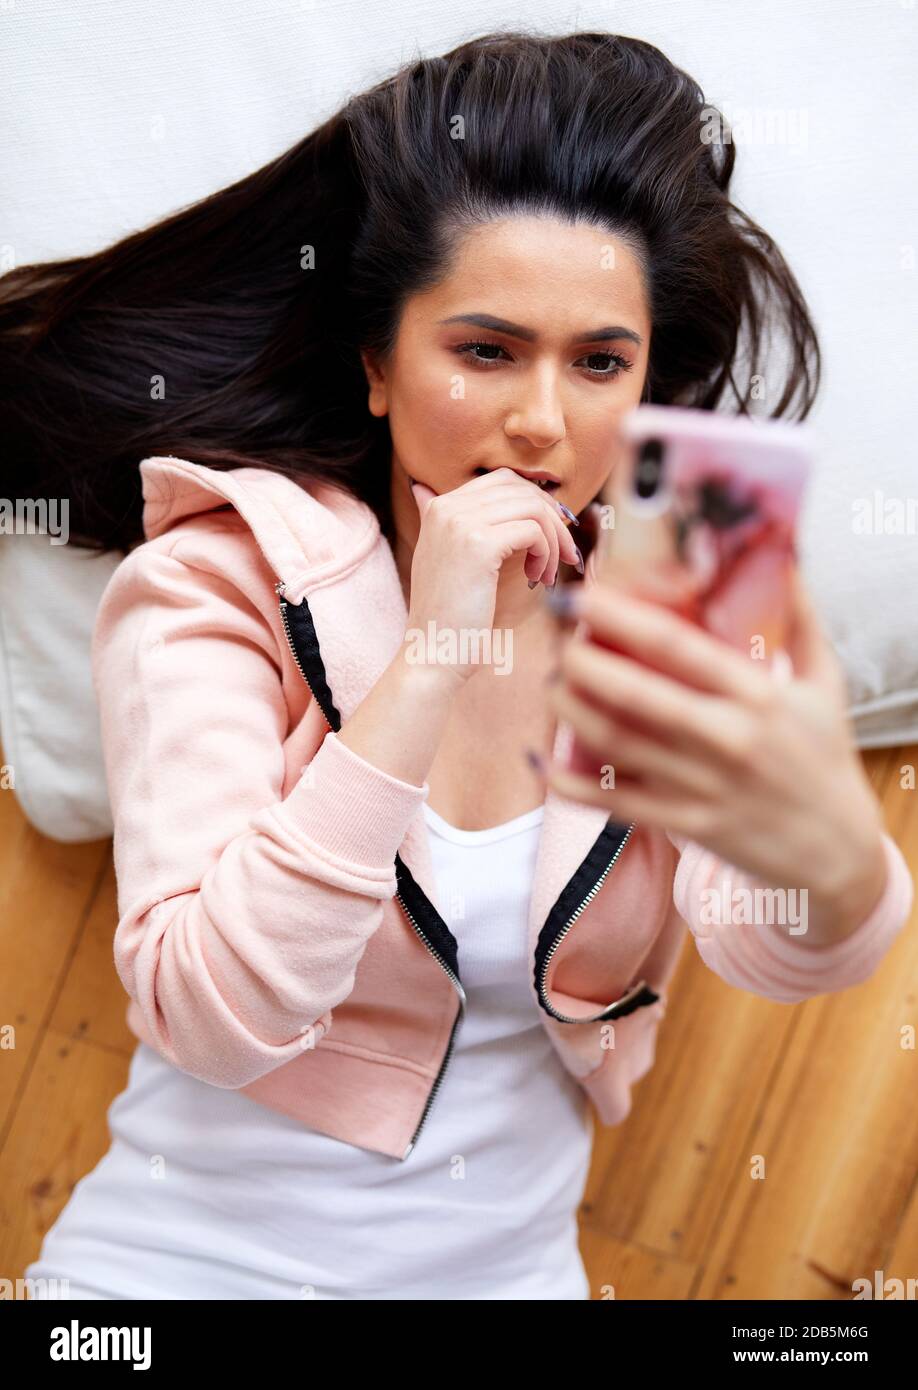 woman looking shocked looking at message Stock Photo